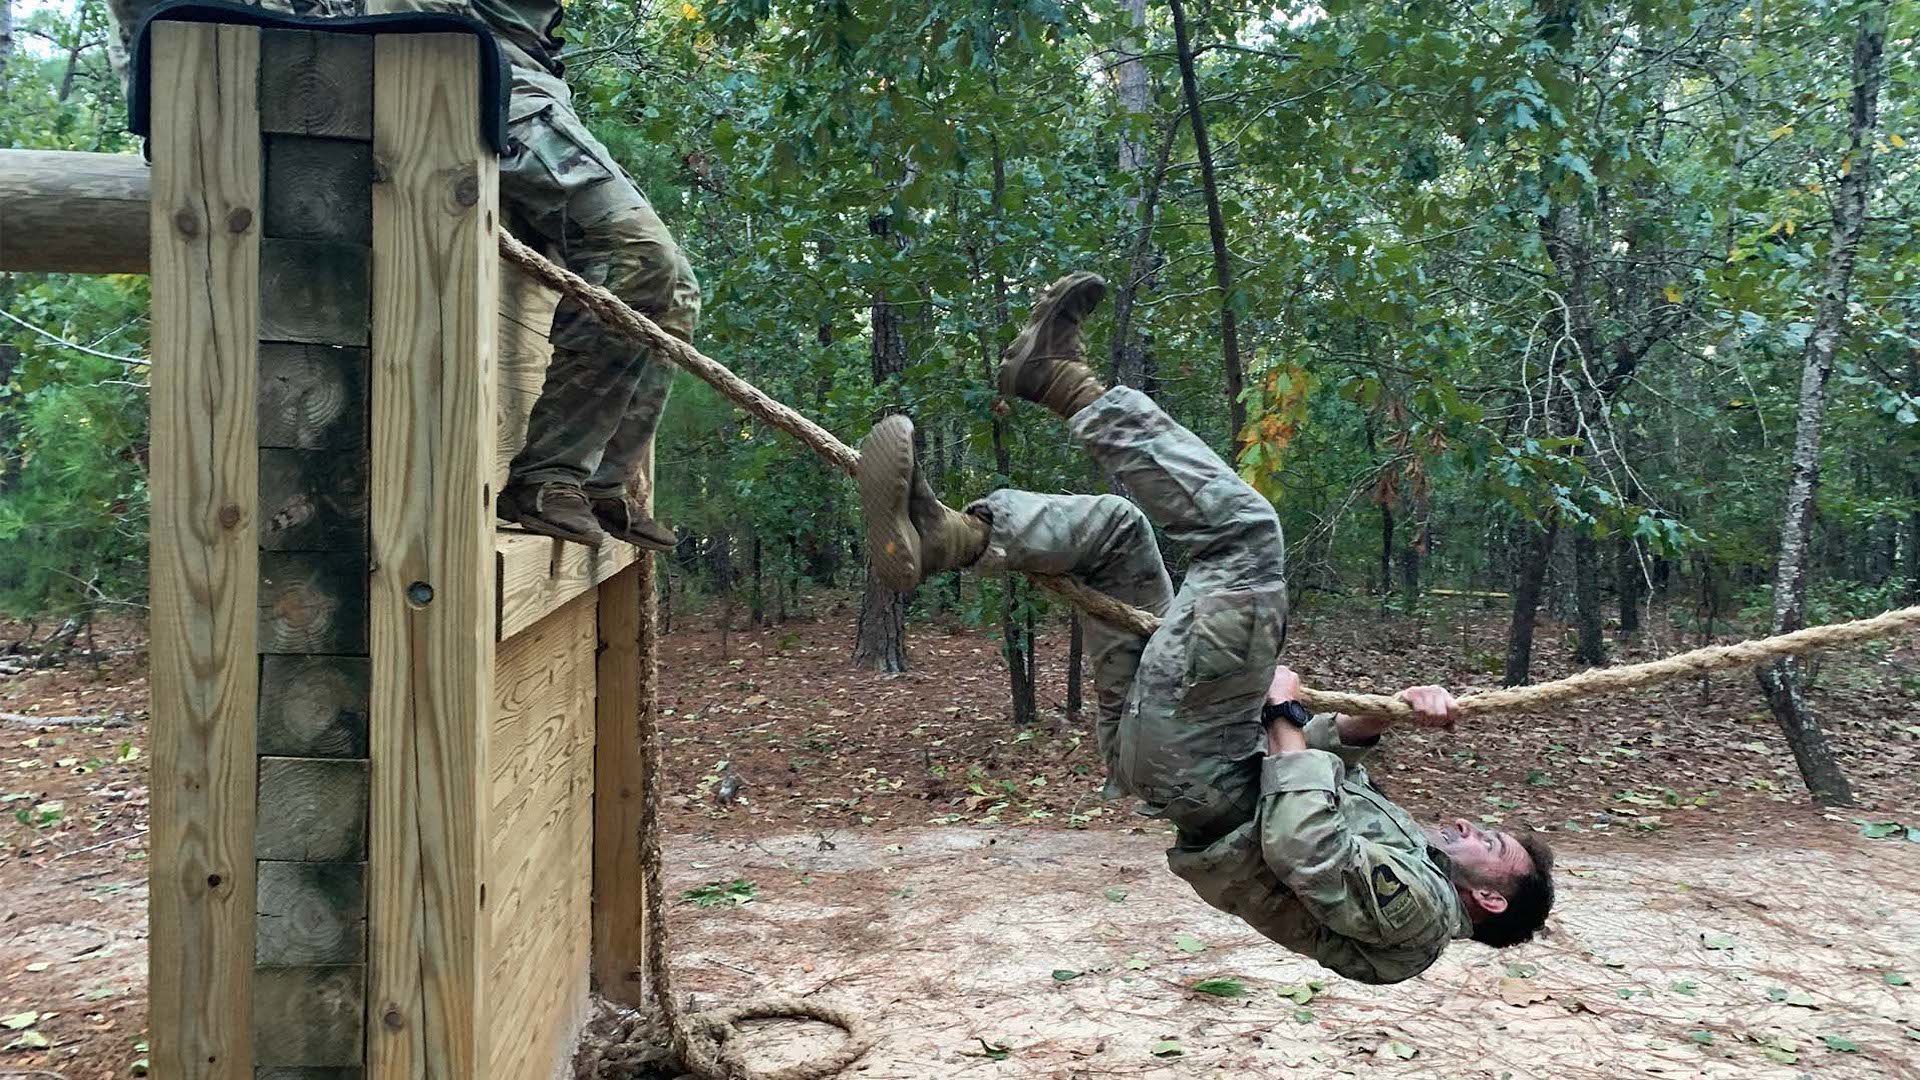 A soldier representing Forces command works his way through one of nine obstacles in the All American Mile obstacle course, on the last day of events at Fort Bragg, North Carolina for the Best Squad Competition, Oct. 5, 2022. Photo by Jenna Biter/Coffee or Die Magazine.